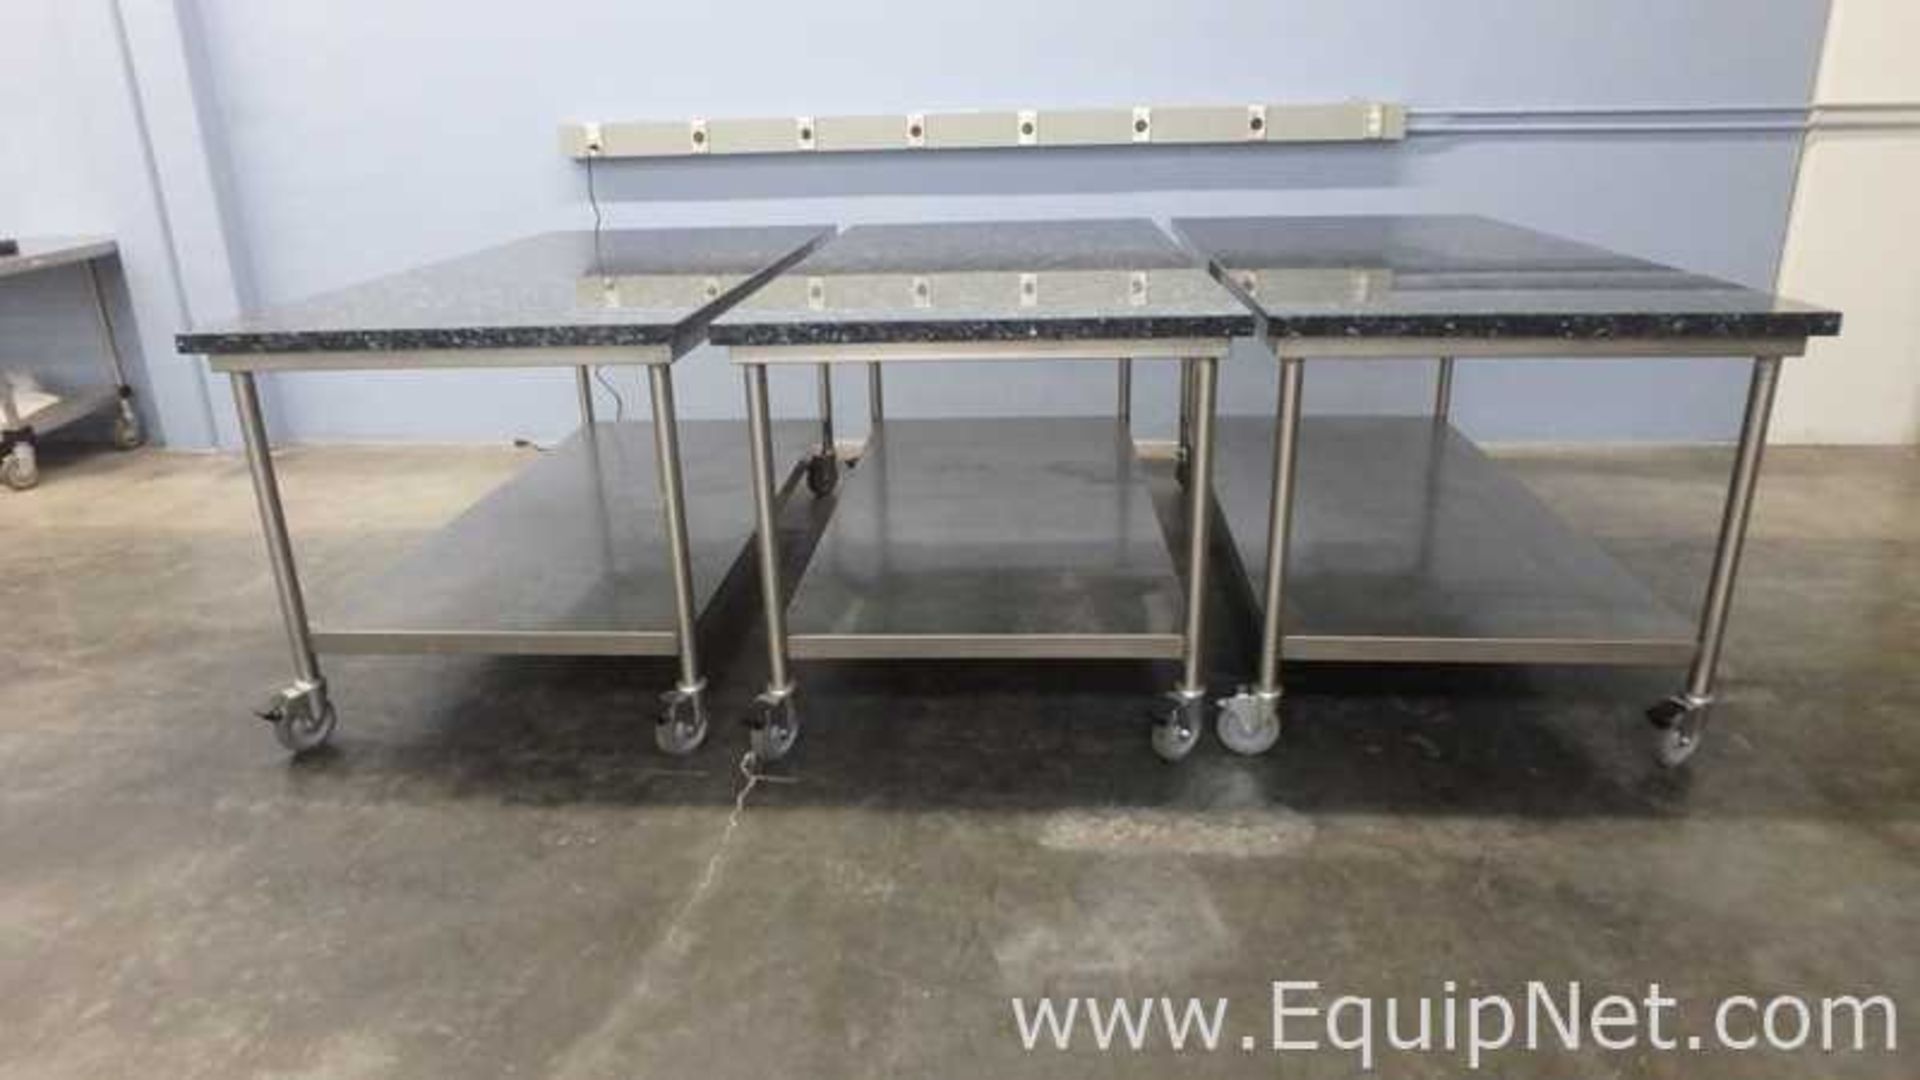 Lot of 3 Granite Top Stainless Steel Work Tables 75in x 39in - Image 5 of 9